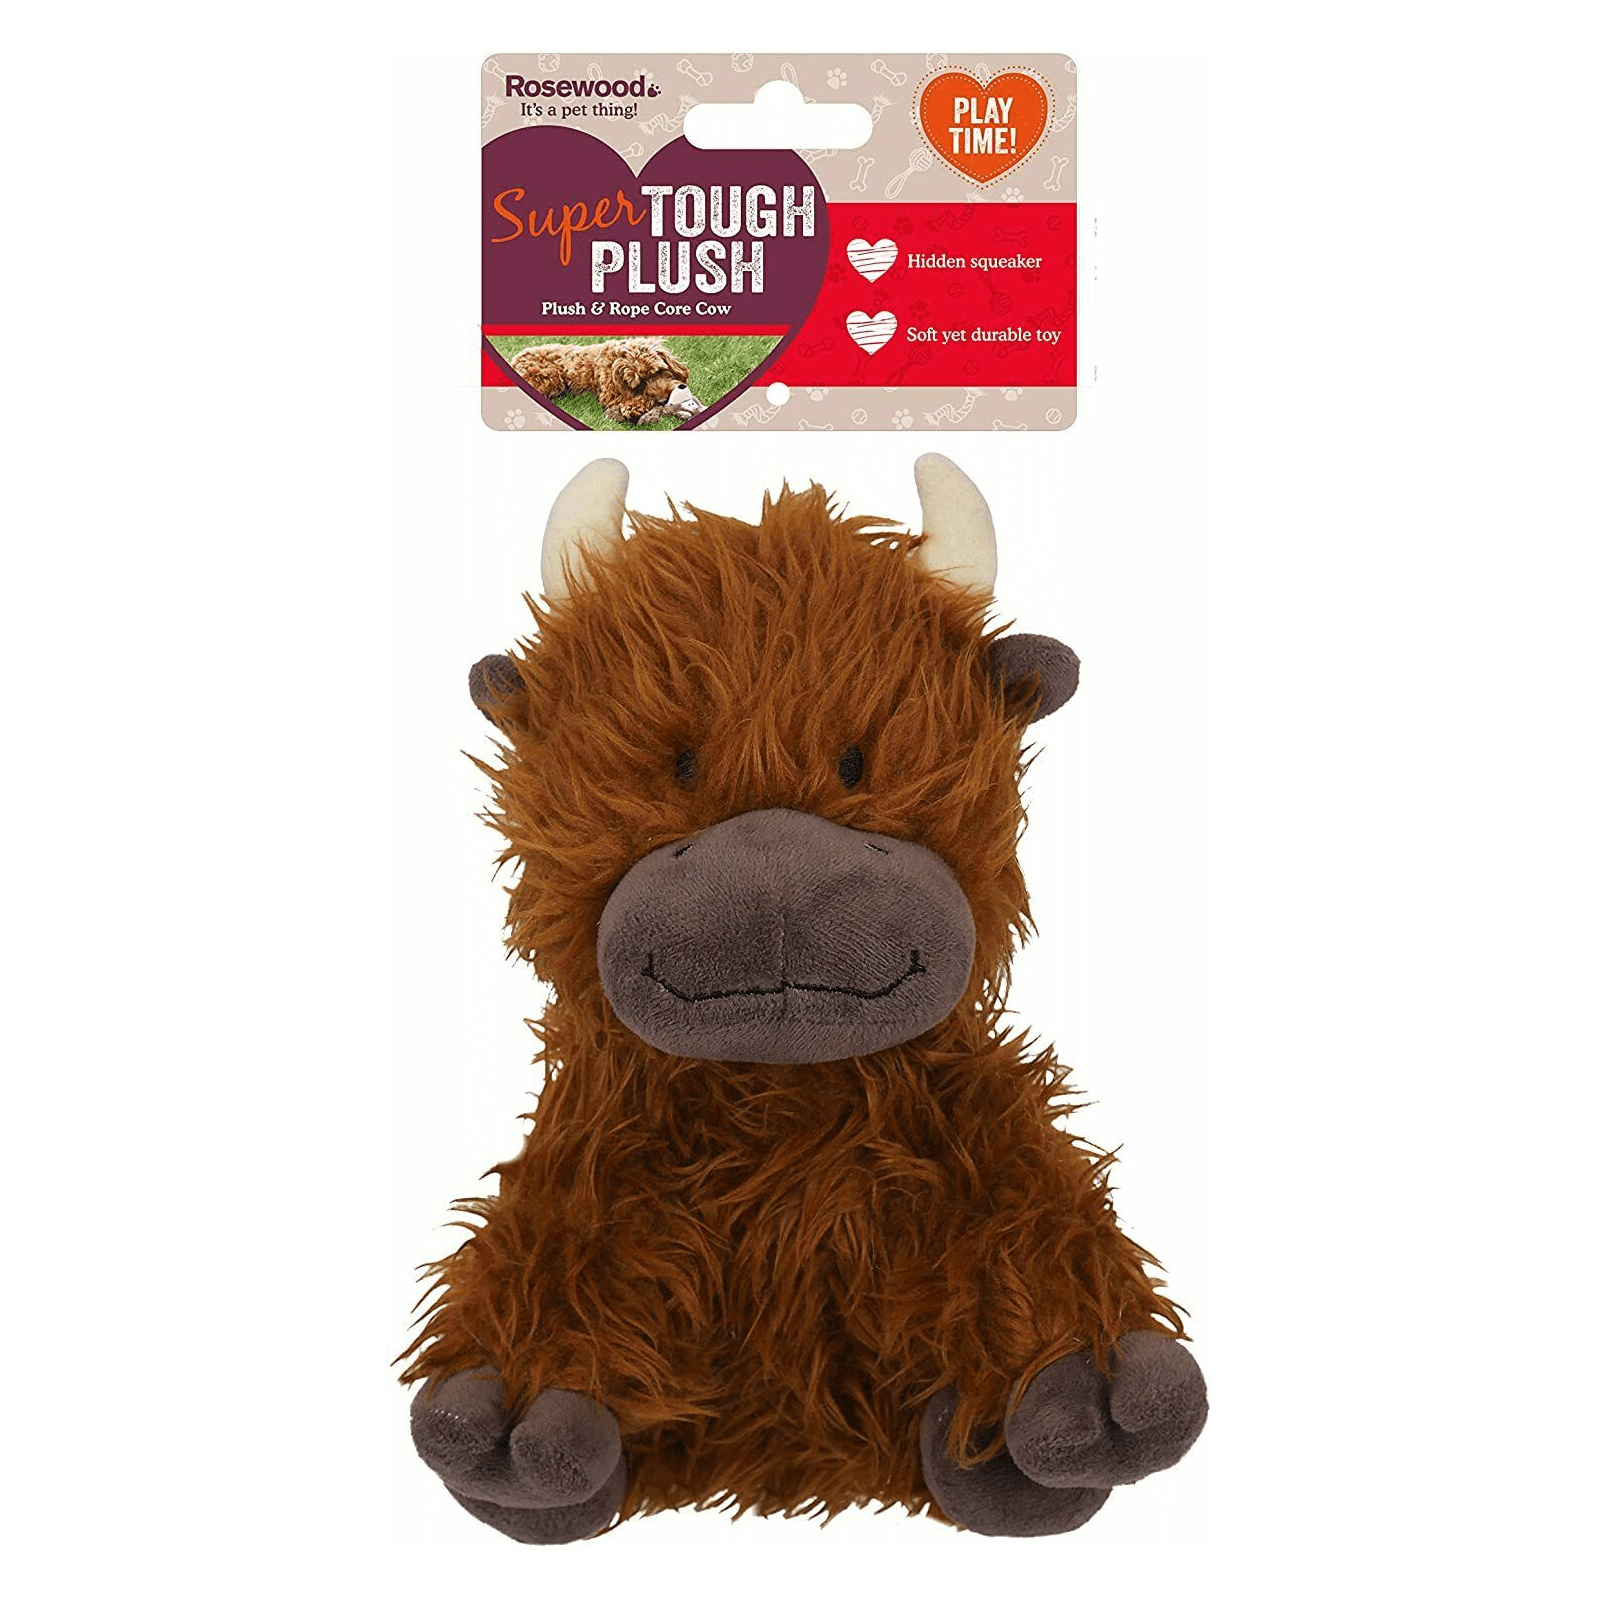 Rosewood Super Tough Plush Rope Core Cow Dog Toy.